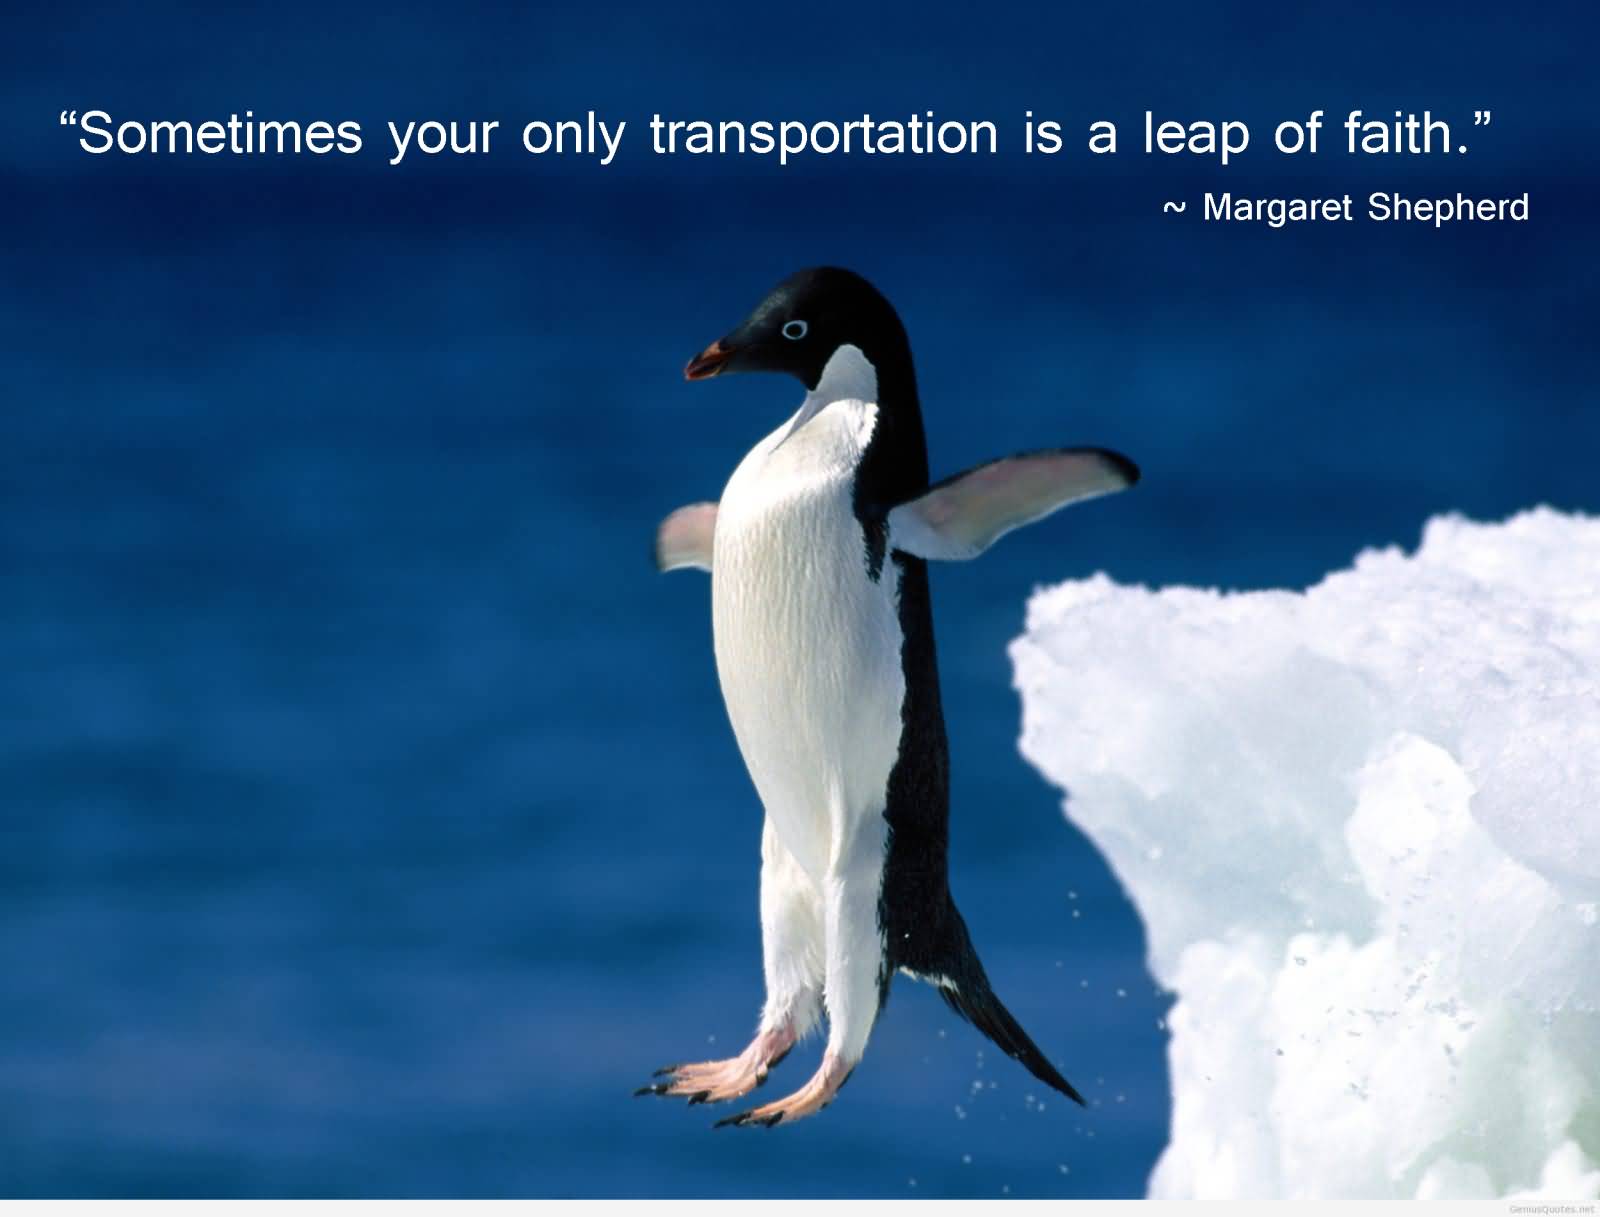 Sometimes your only available transportation is a leap of faith - Margaret Shepard